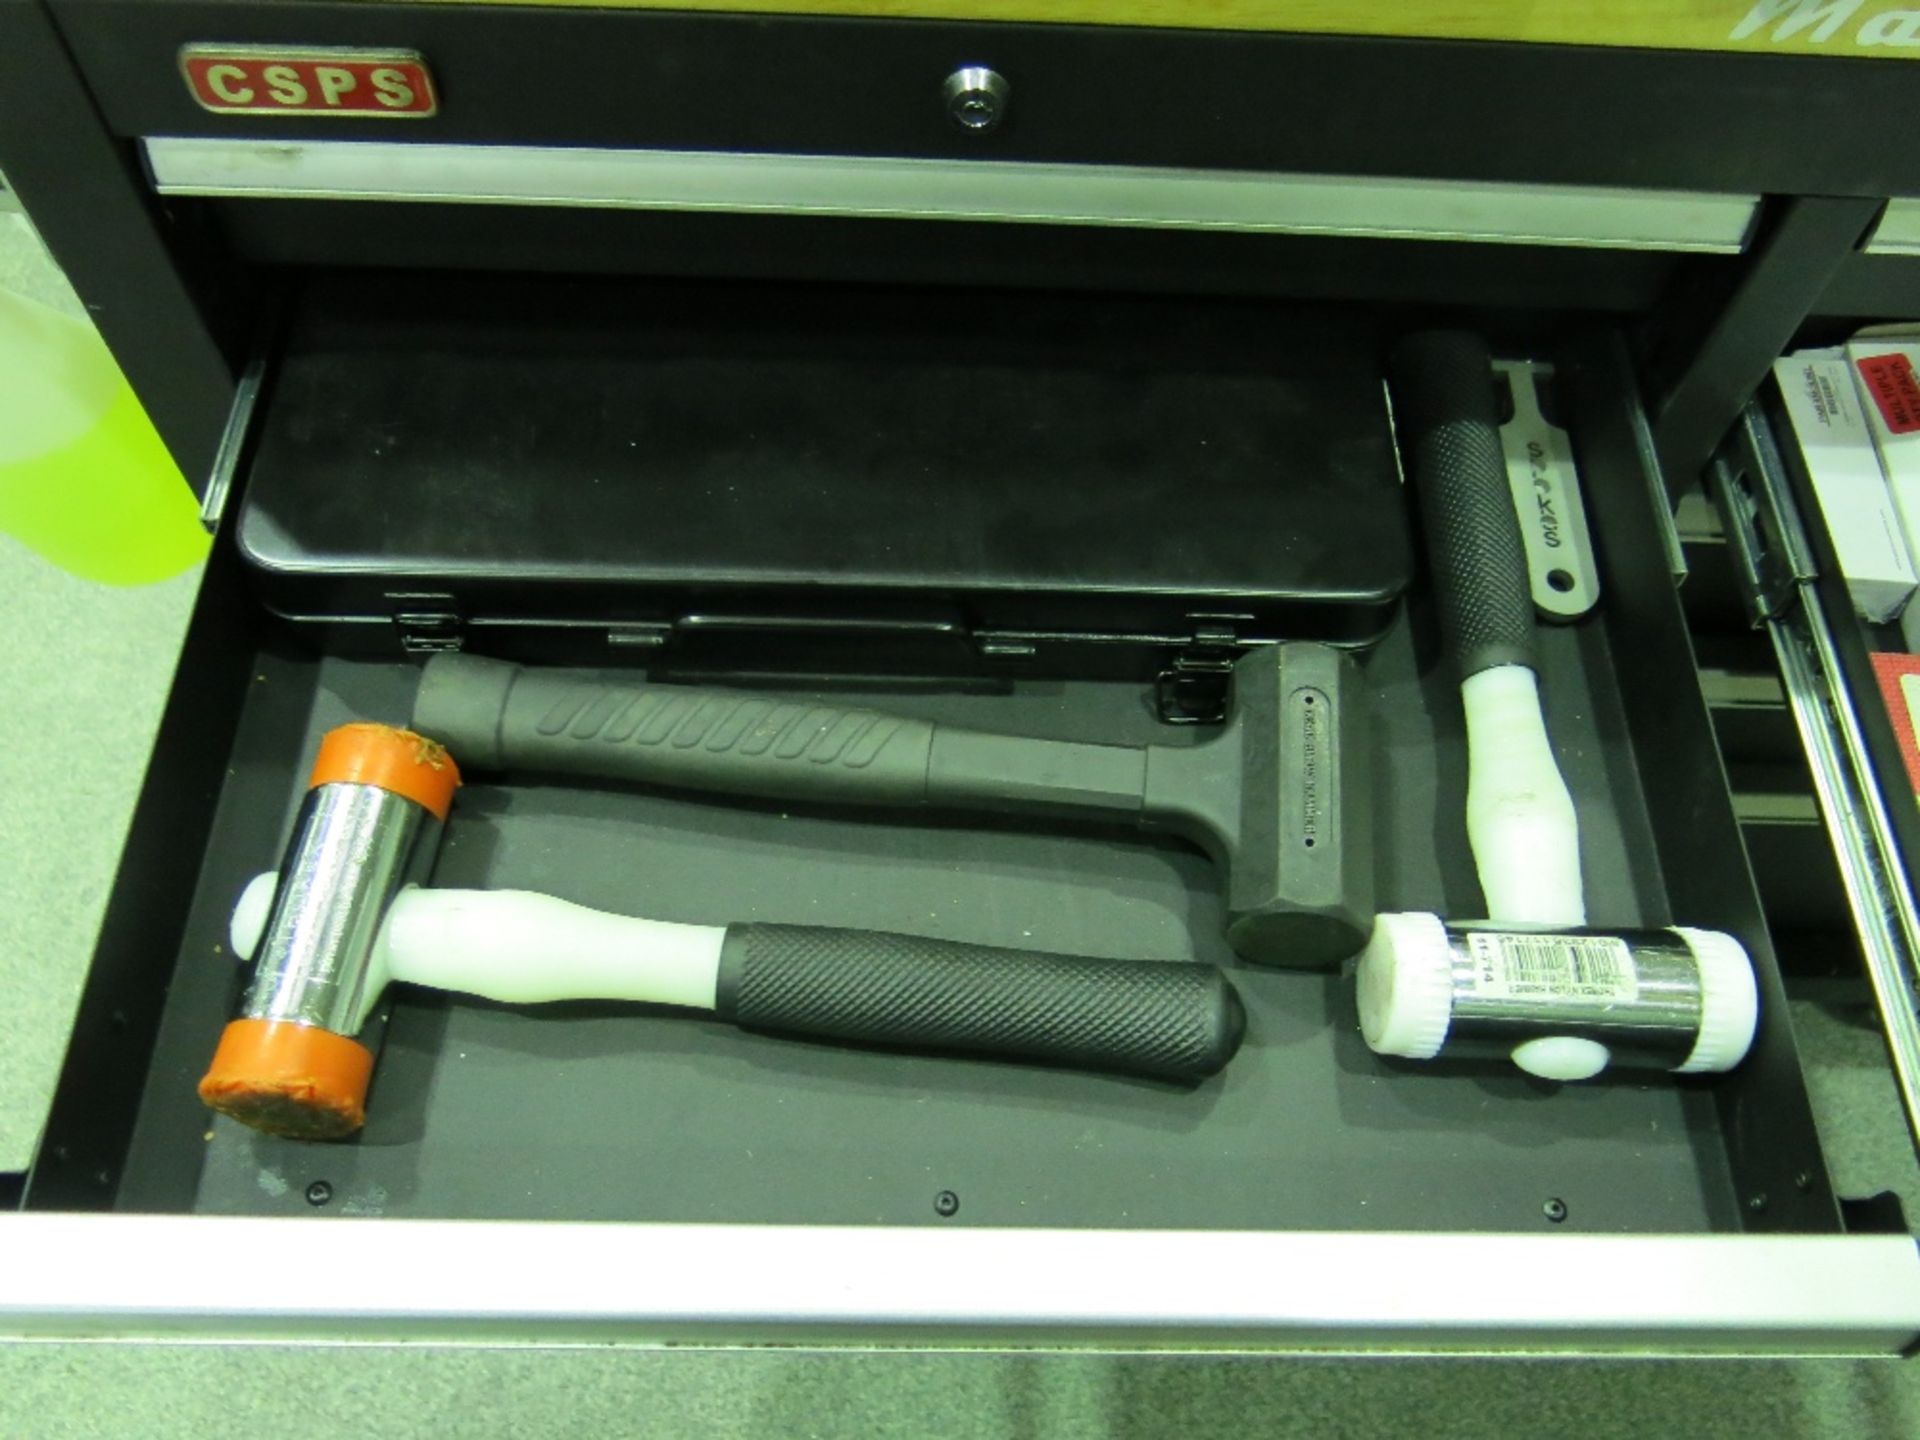 CSPS mobile 10-drawer tool cabinet with tooling contents for Hurco VMX64 - Image 3 of 12